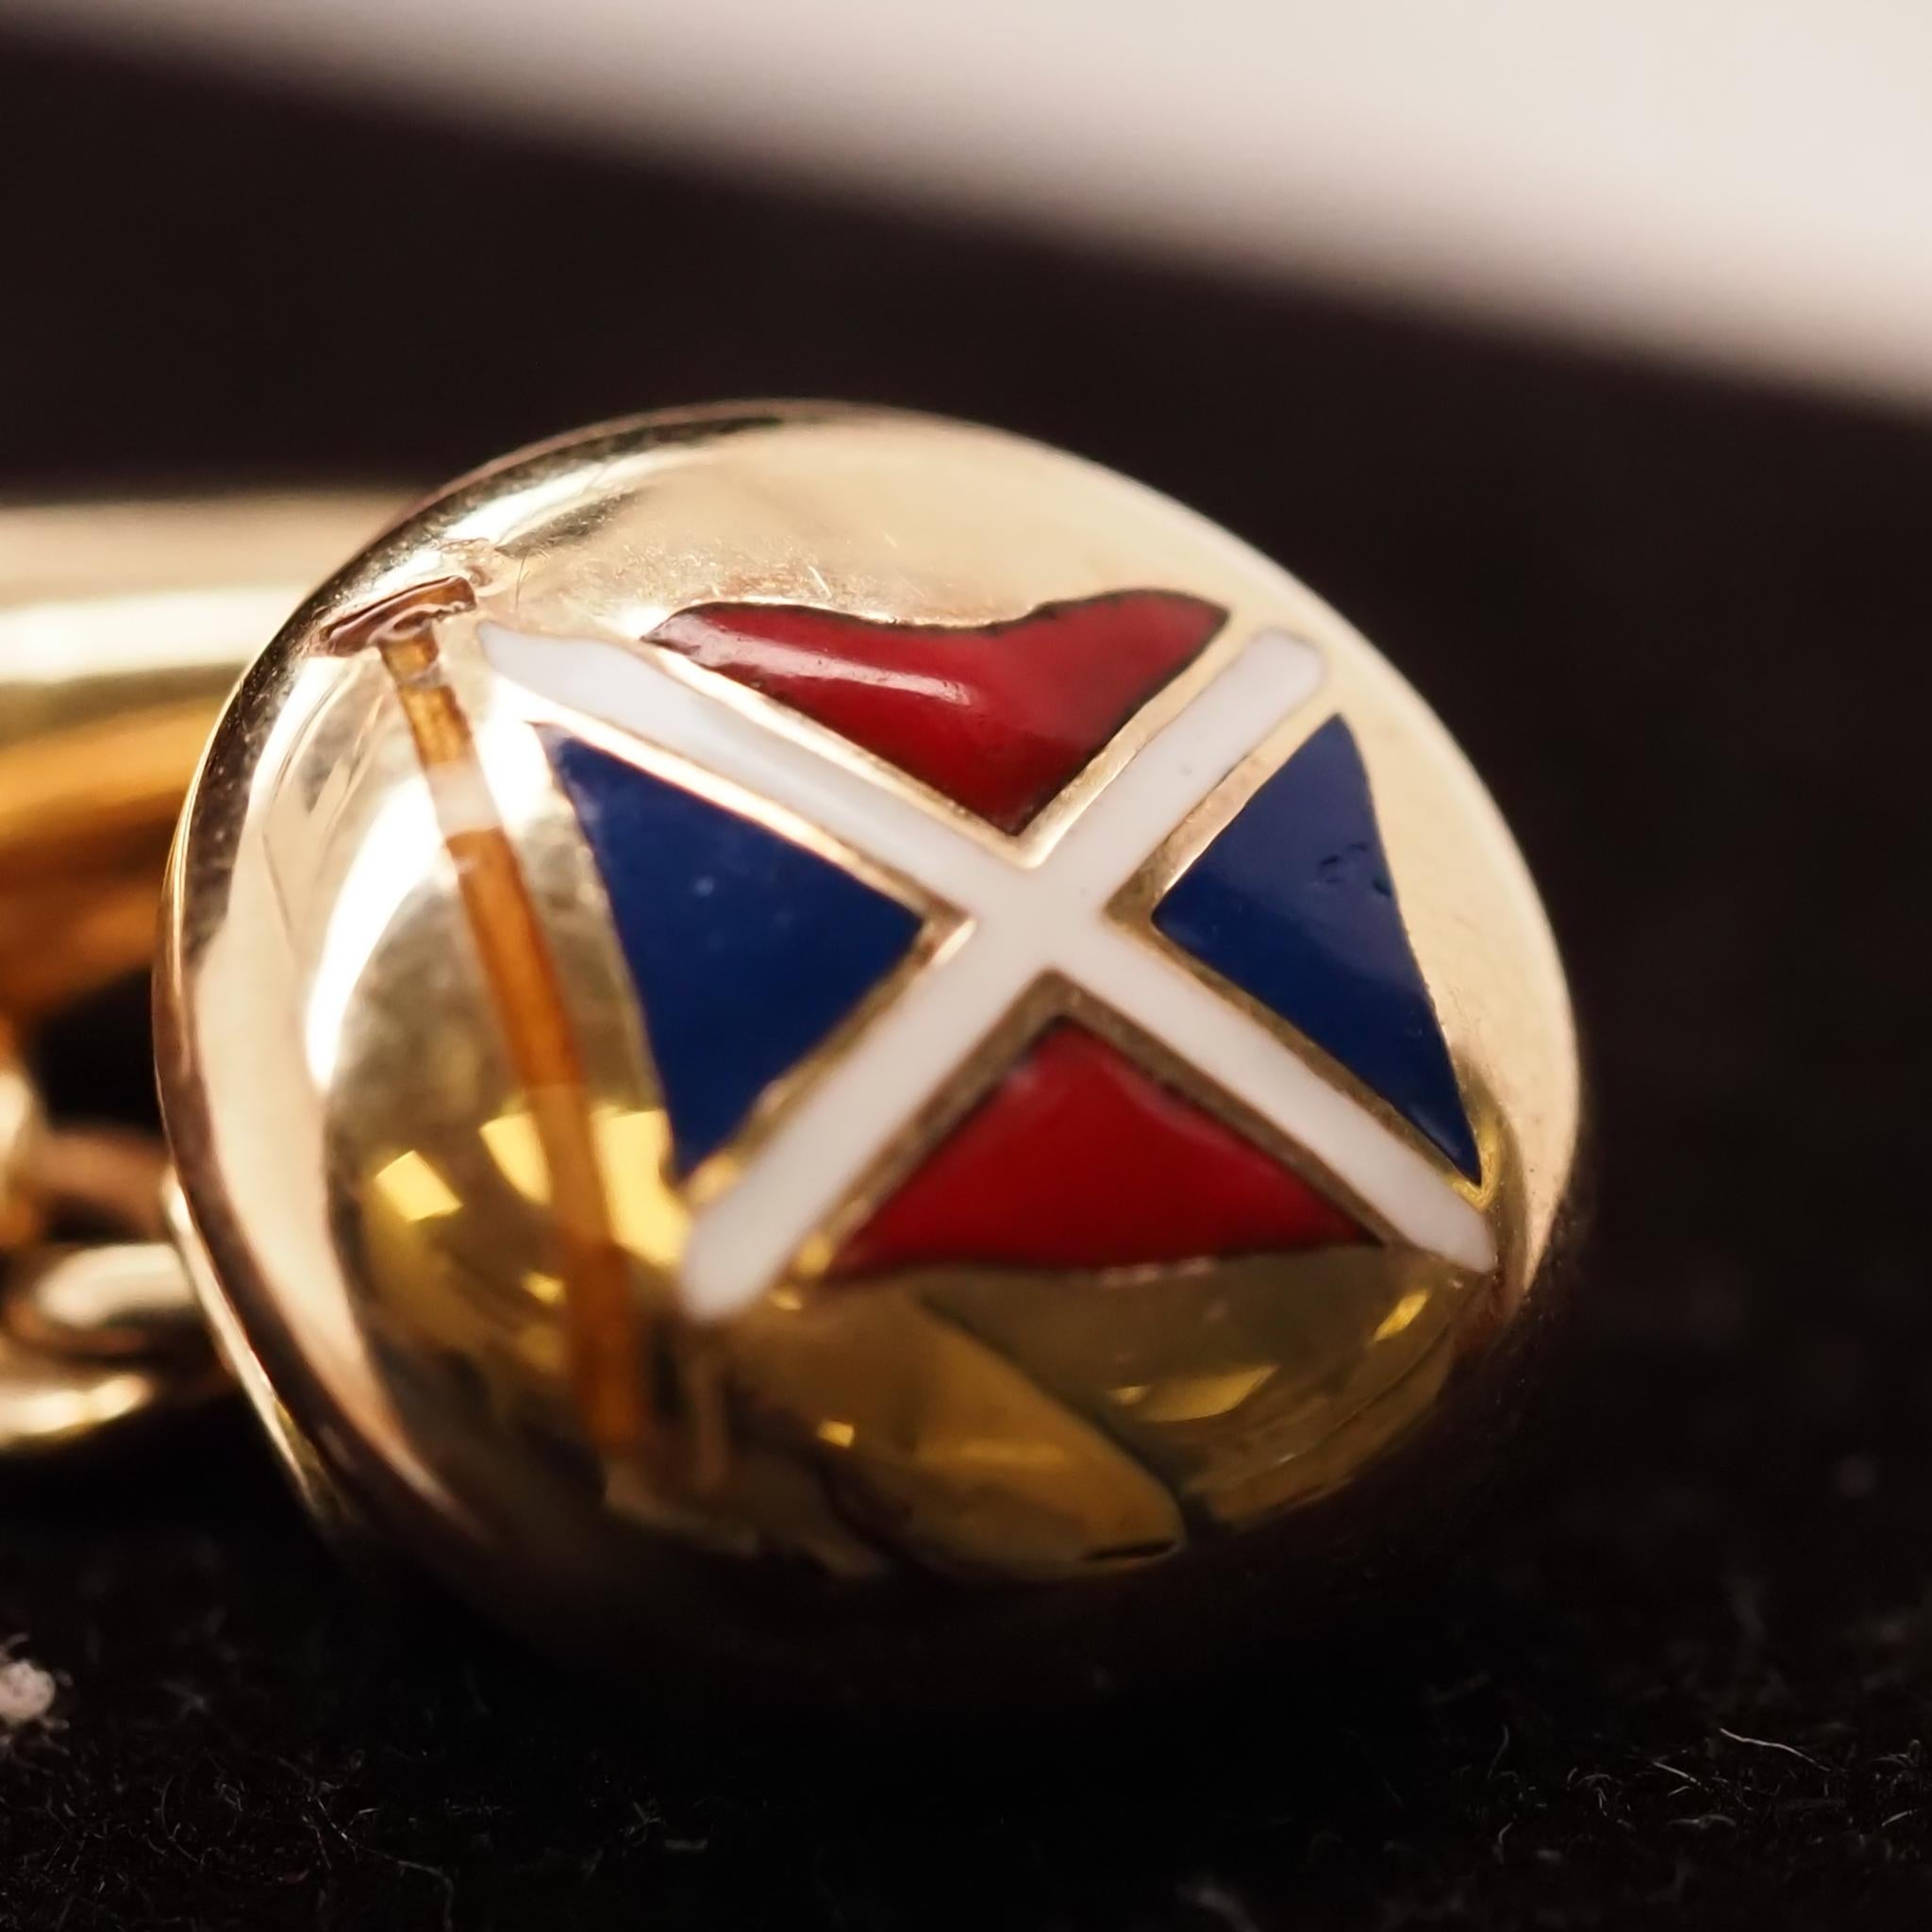 Year: 1940s

Item Details:
Metal Type: 14K Yellow Gold [Hallmarked, and Tested]
Weight: 7.1grams

*Enamel with a flag on both cufflinks is in excellent condition.

Condition: Excellent
